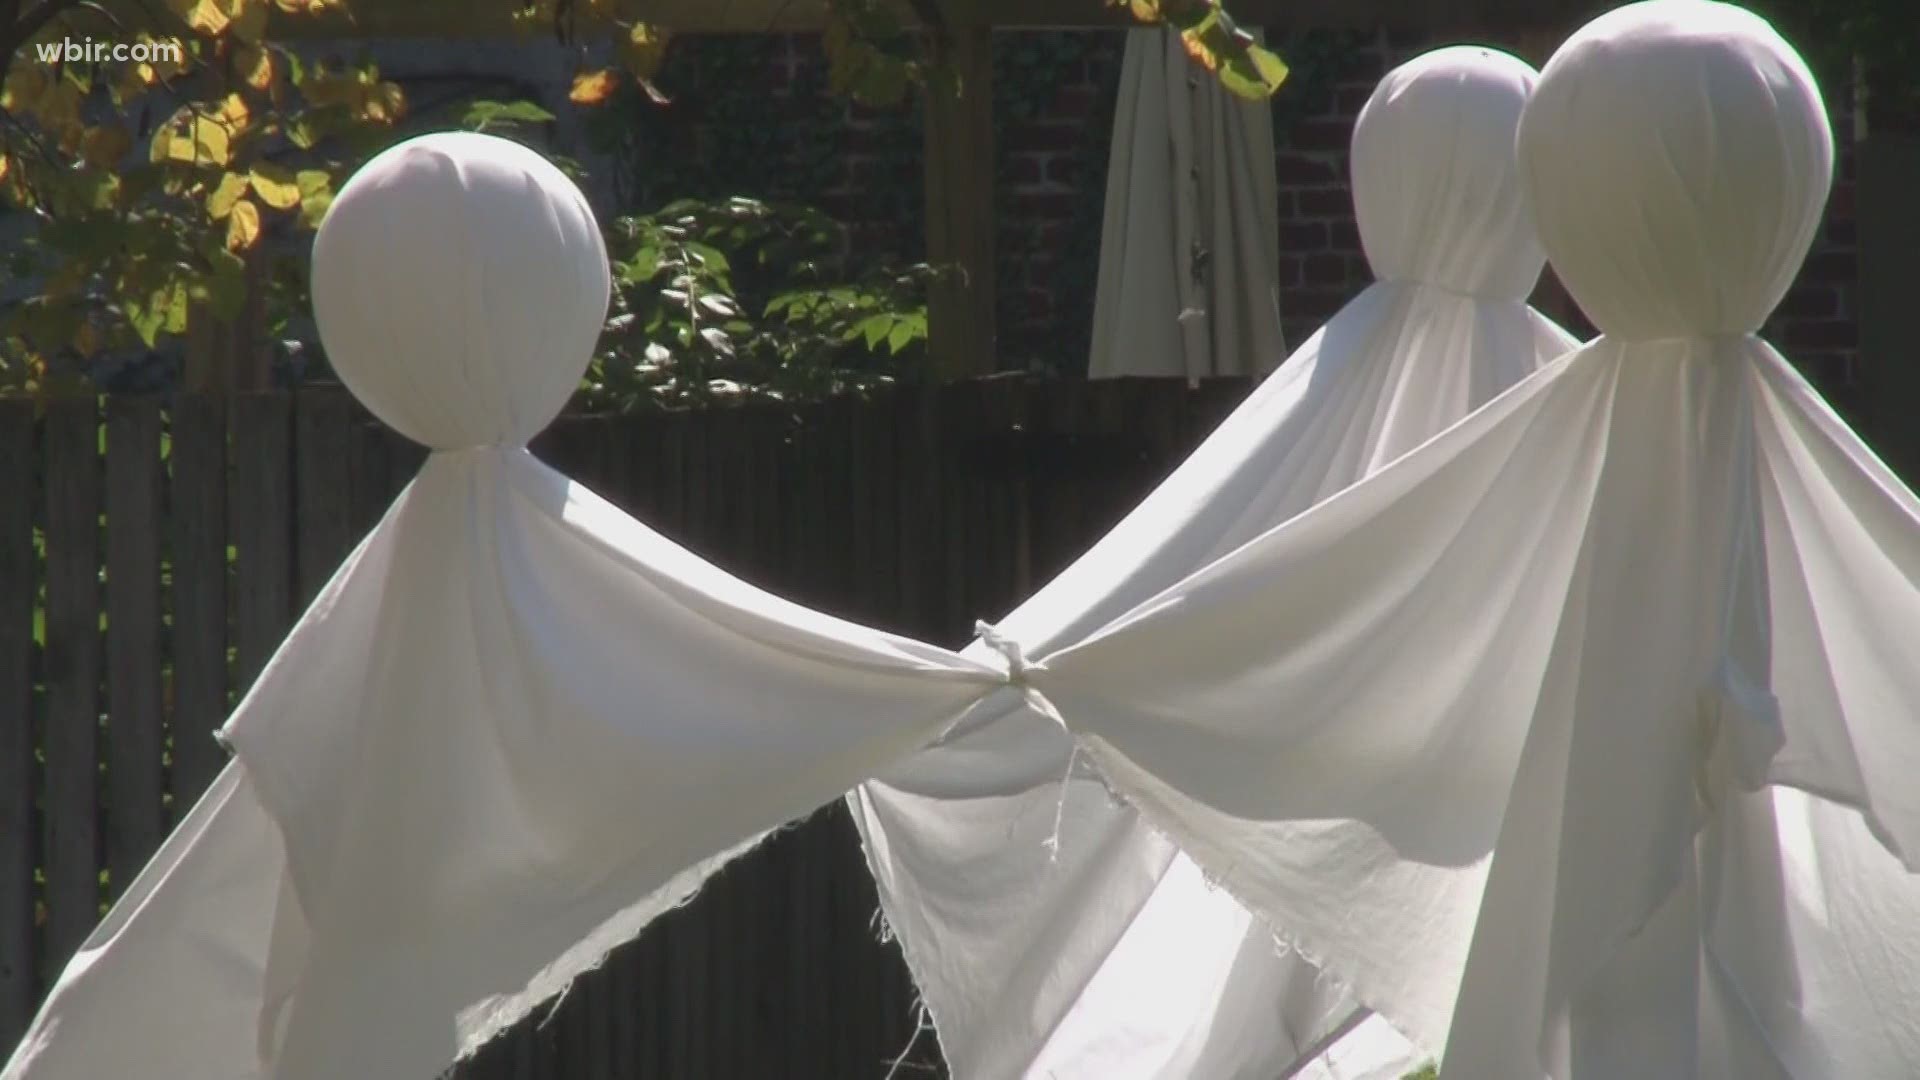 10News reporter Katie Inman explains how two Knoxville women welcome their ghost roommates, and aren't surprised by how haunted the city really is.